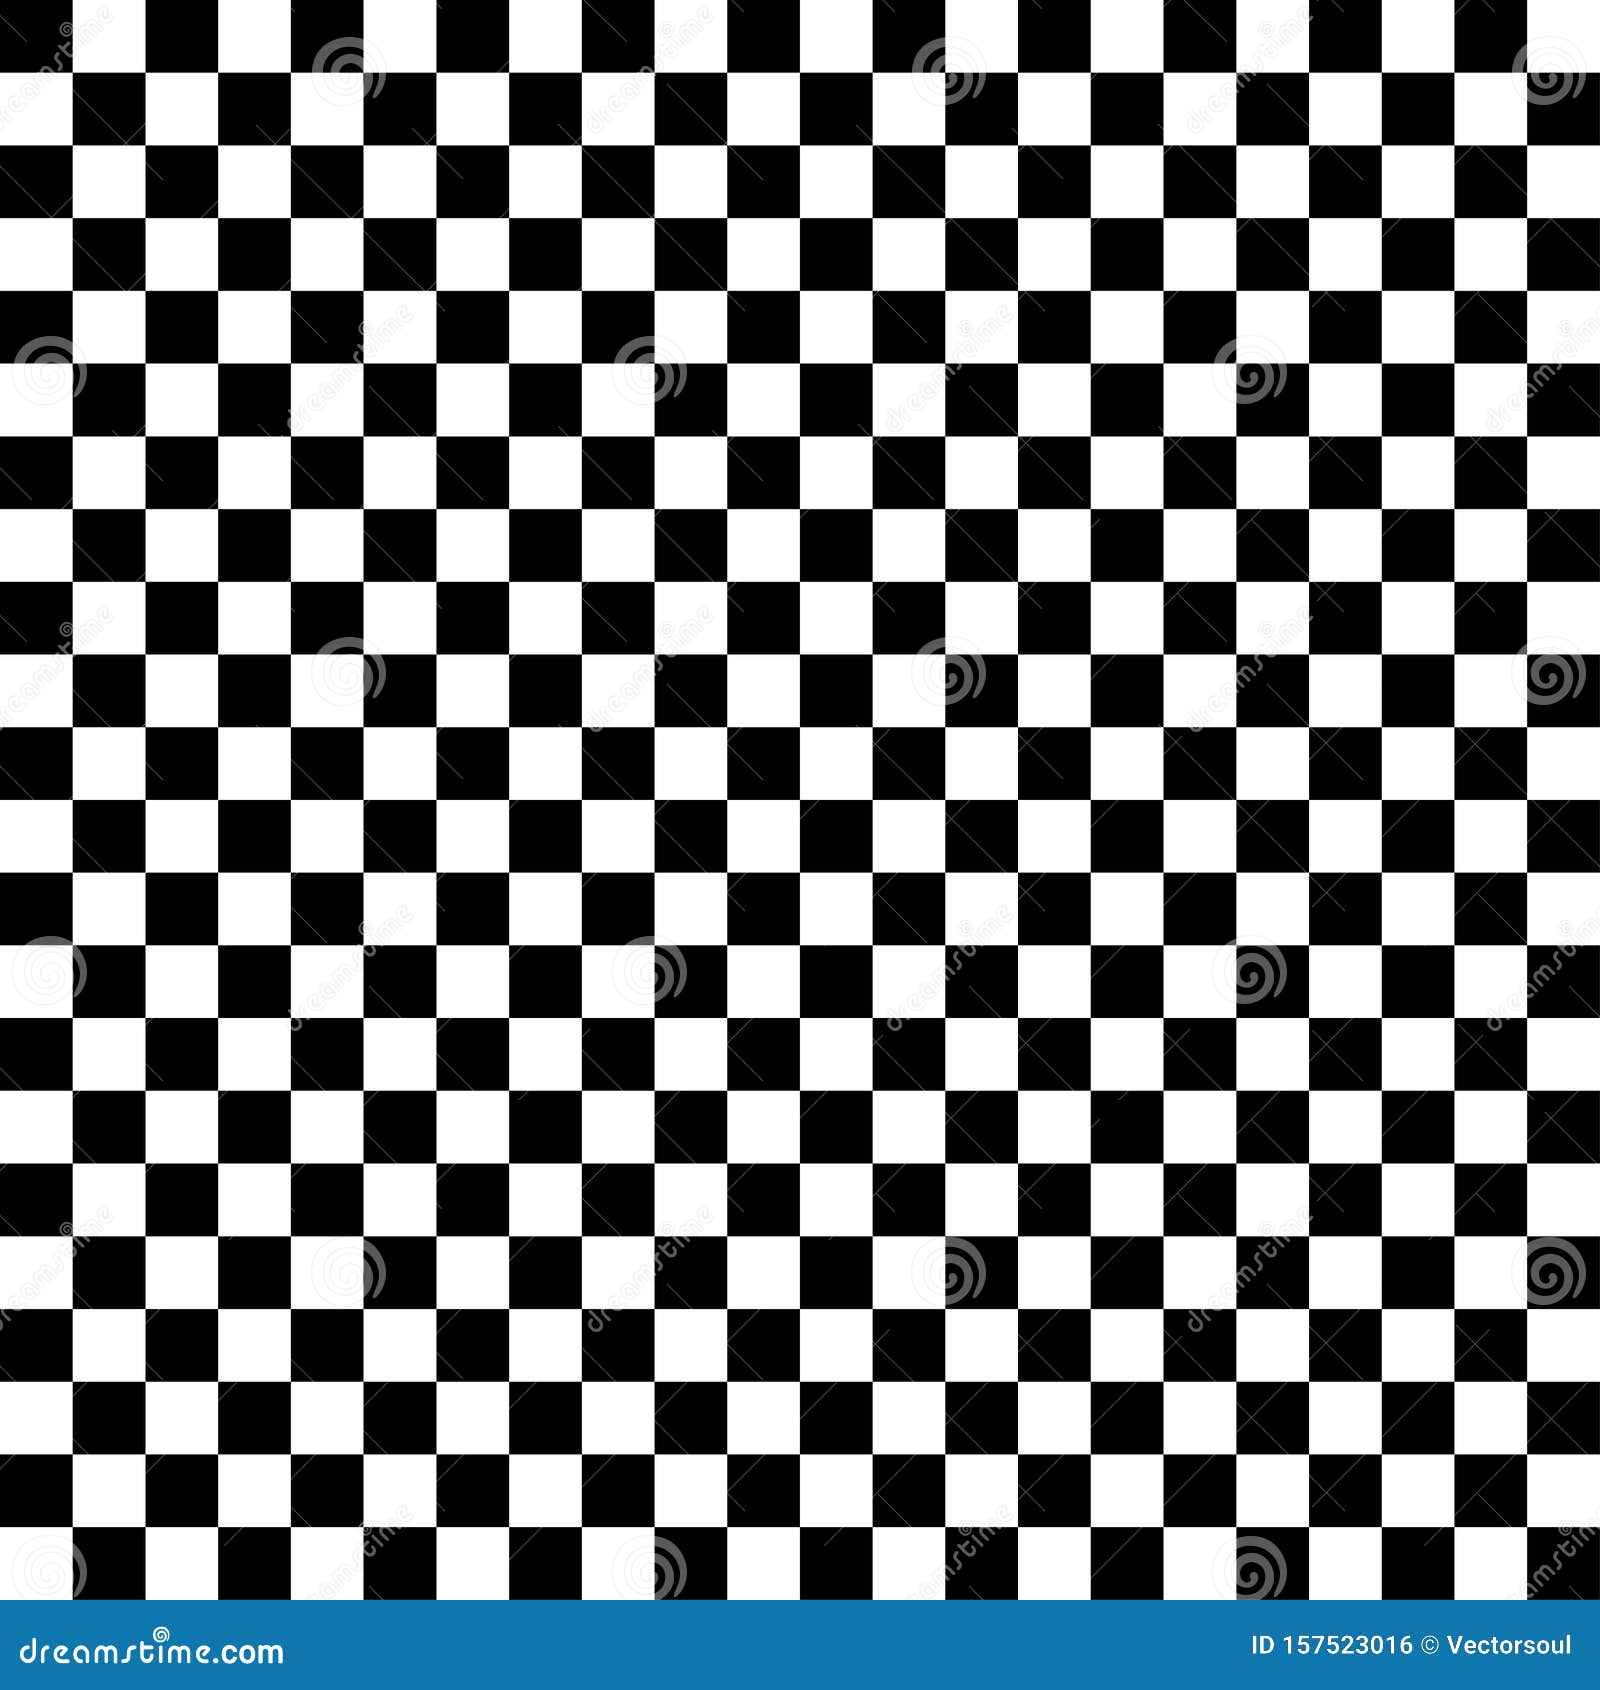 Checkered, Chequered Seamless Pattern. Chess Squares Repeatable Texture ...